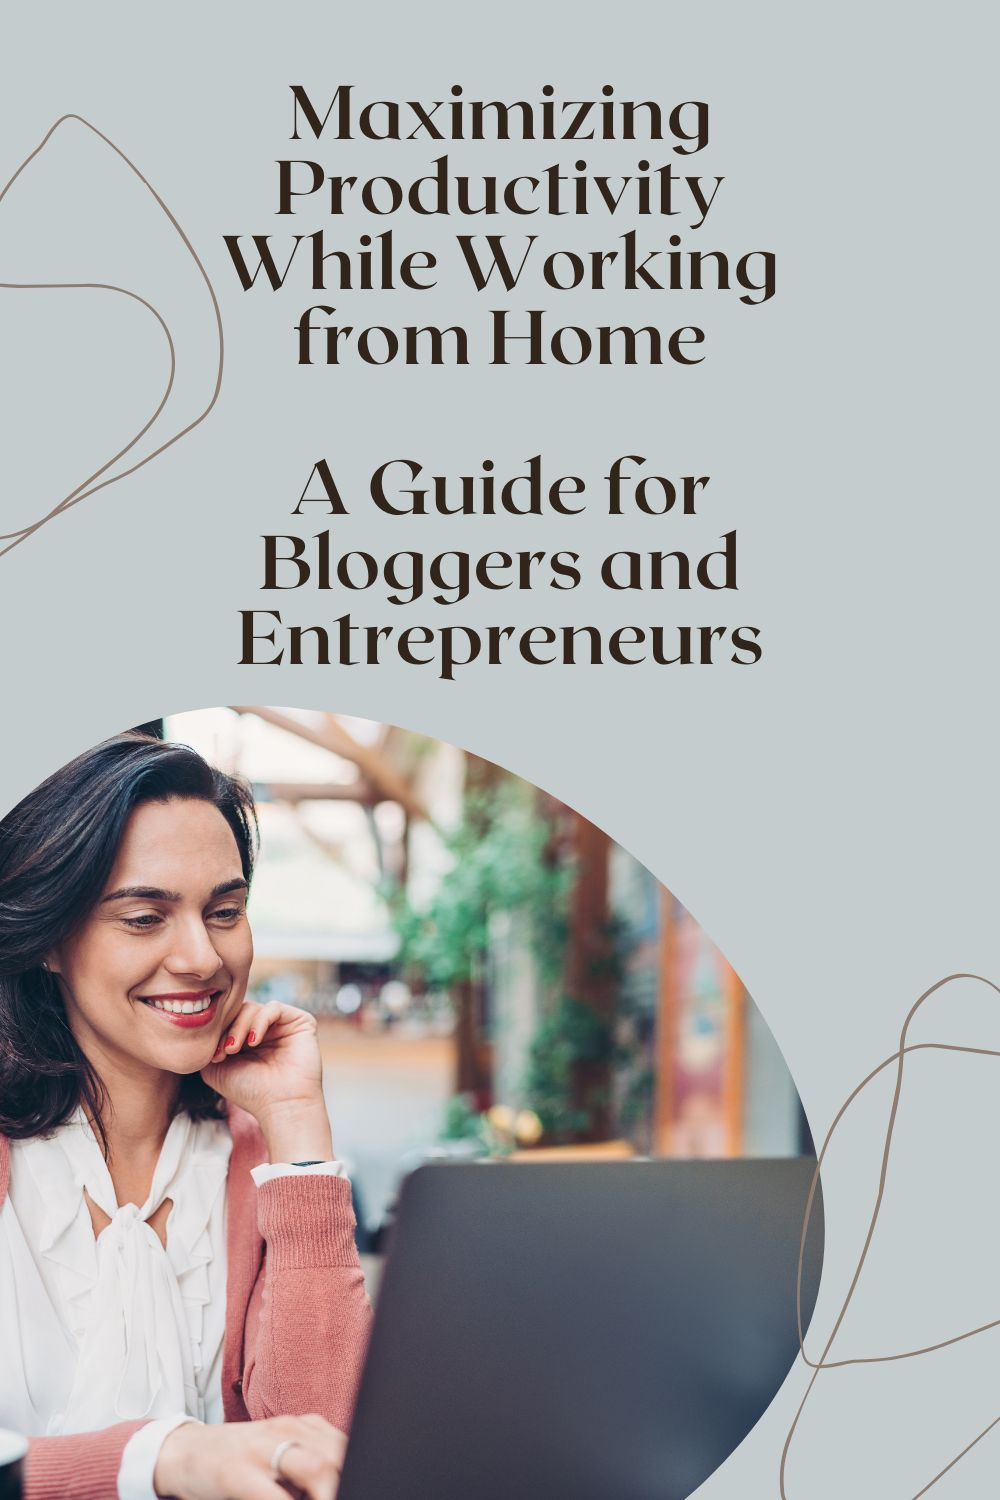 Learn how to stay focused, motivated, and productive while working from home with this guide, packed with tips and resources for bloggers and entrepreneurs.